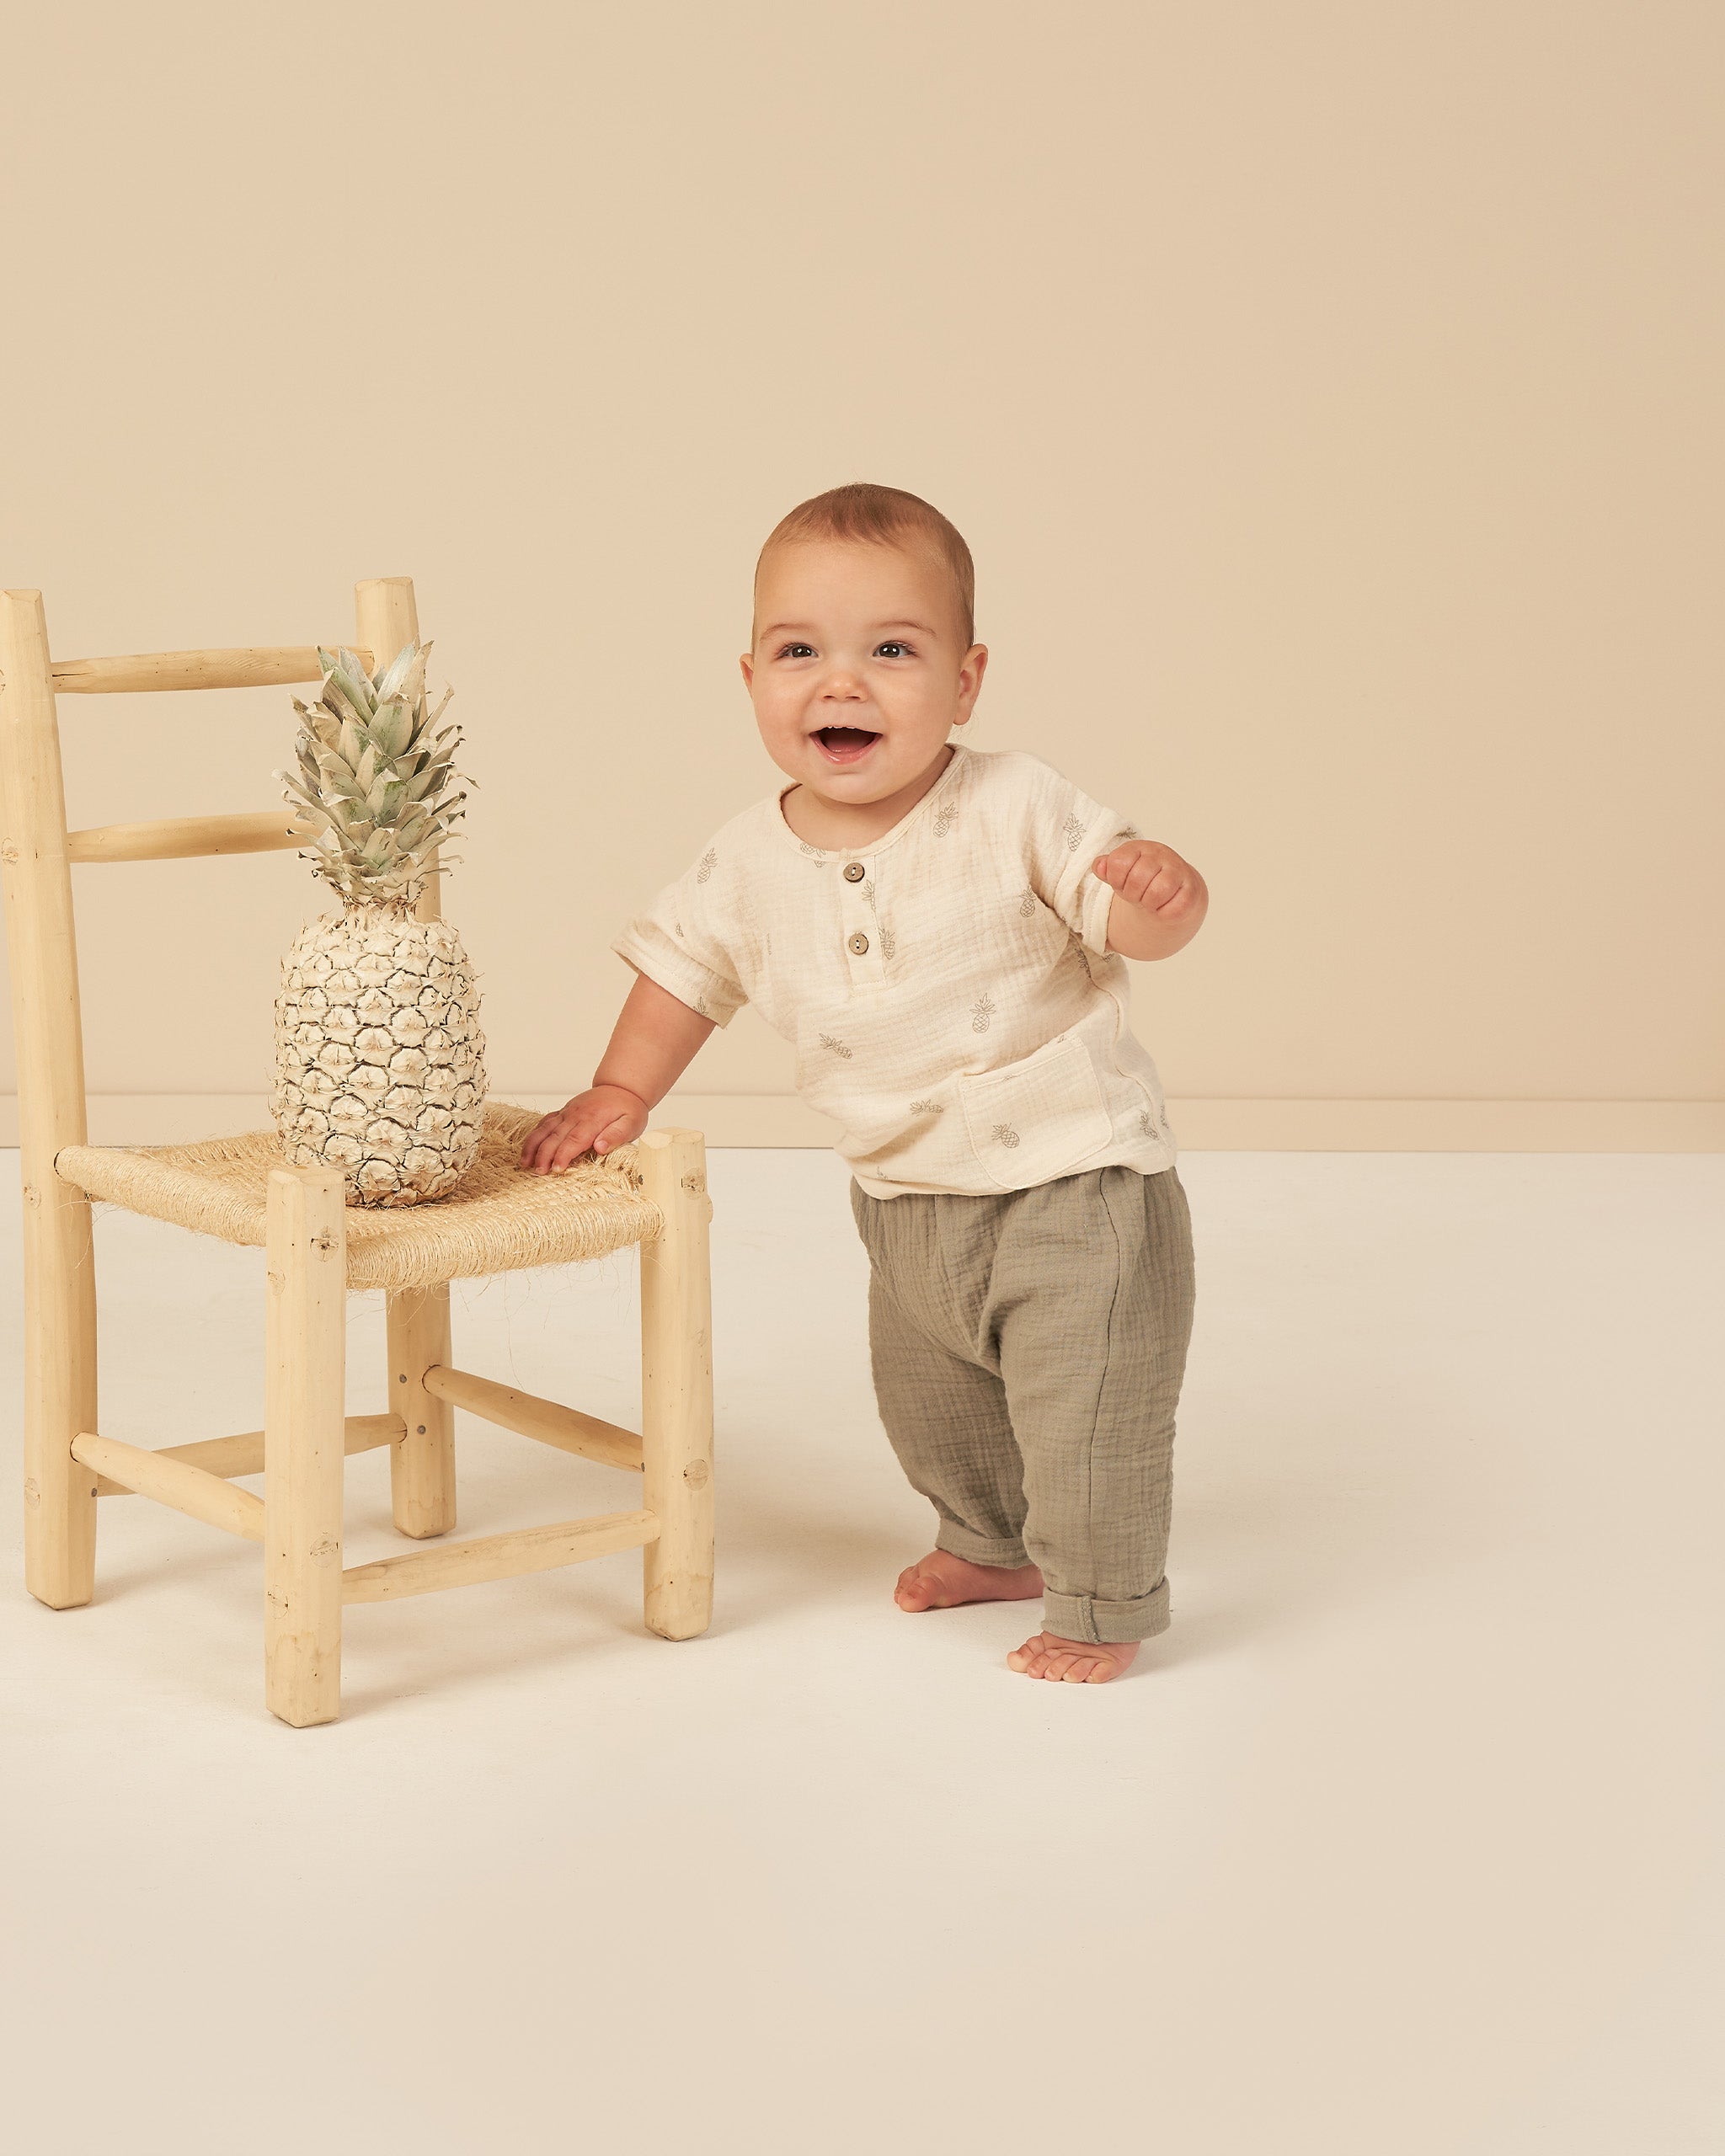 Woven Henley Tee || Pineapple - Rylee + Cru | Kids Clothes | Trendy Baby Clothes | Modern Infant Outfits |